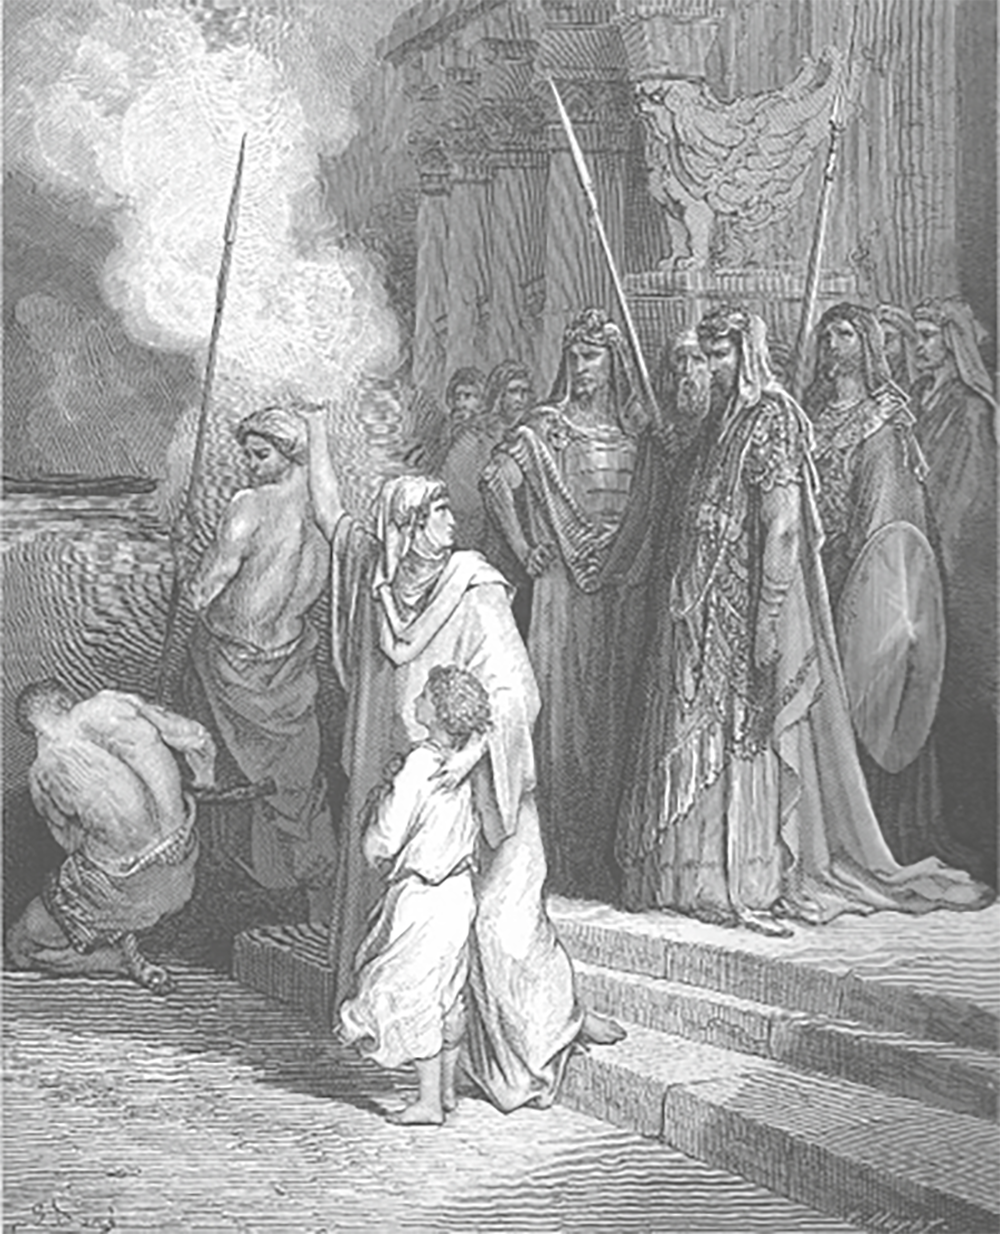 The Courage of a Mother by Gustave Dore